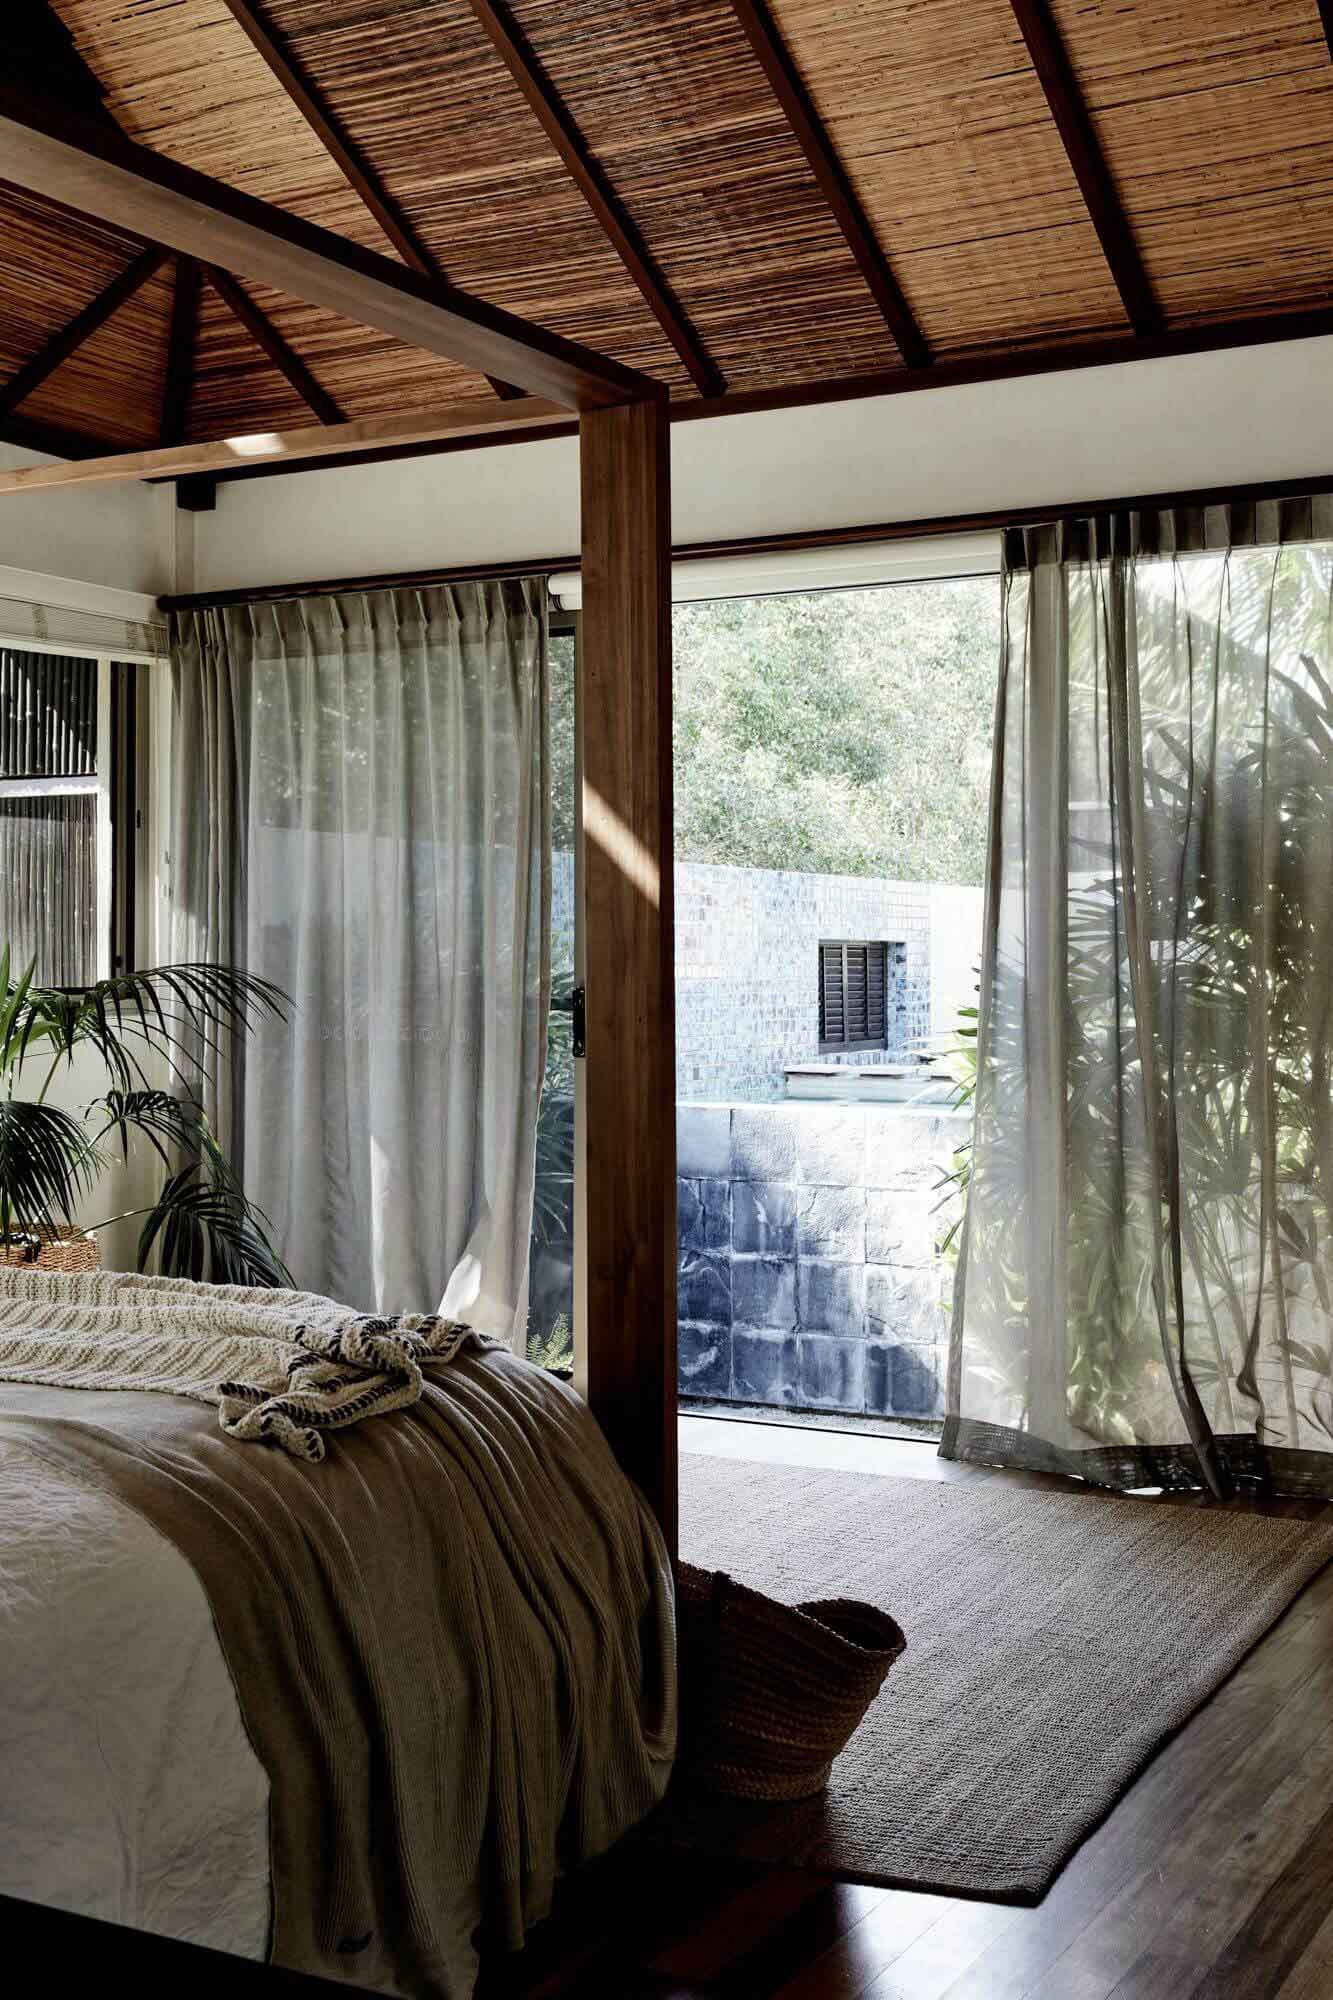 Grand Villa master bedroom overlooking the private pool at The Villas of Byron